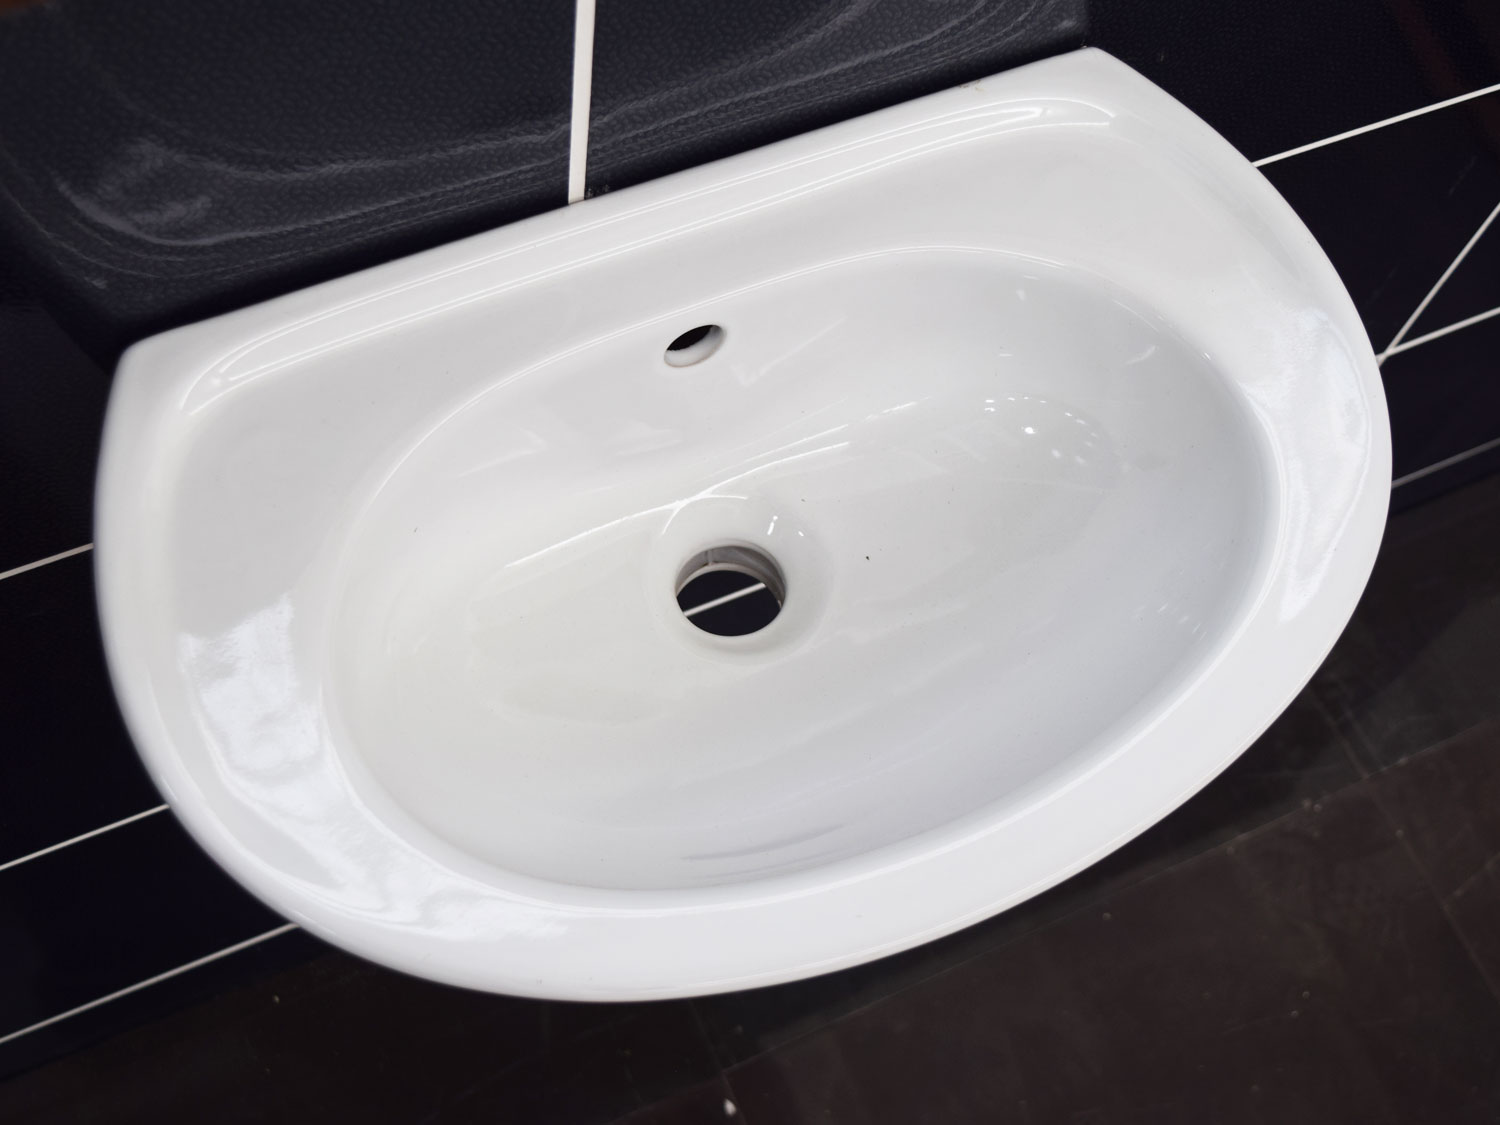 Flair White Wall Mounted Cloakroom Basin